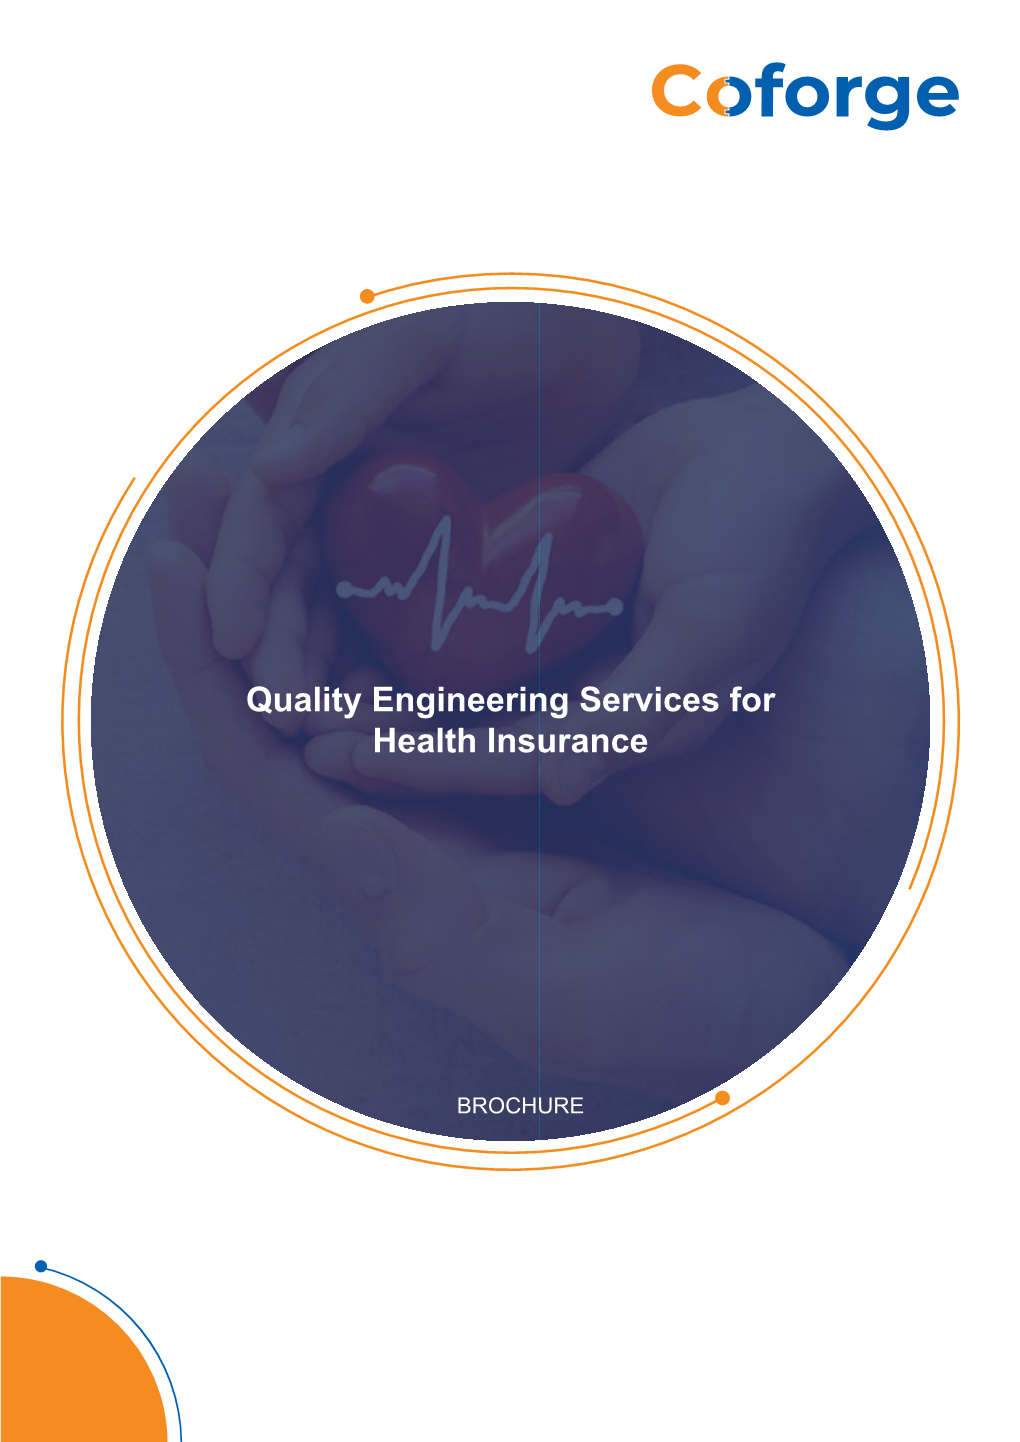 Quality Engineering Services for Health Insurance